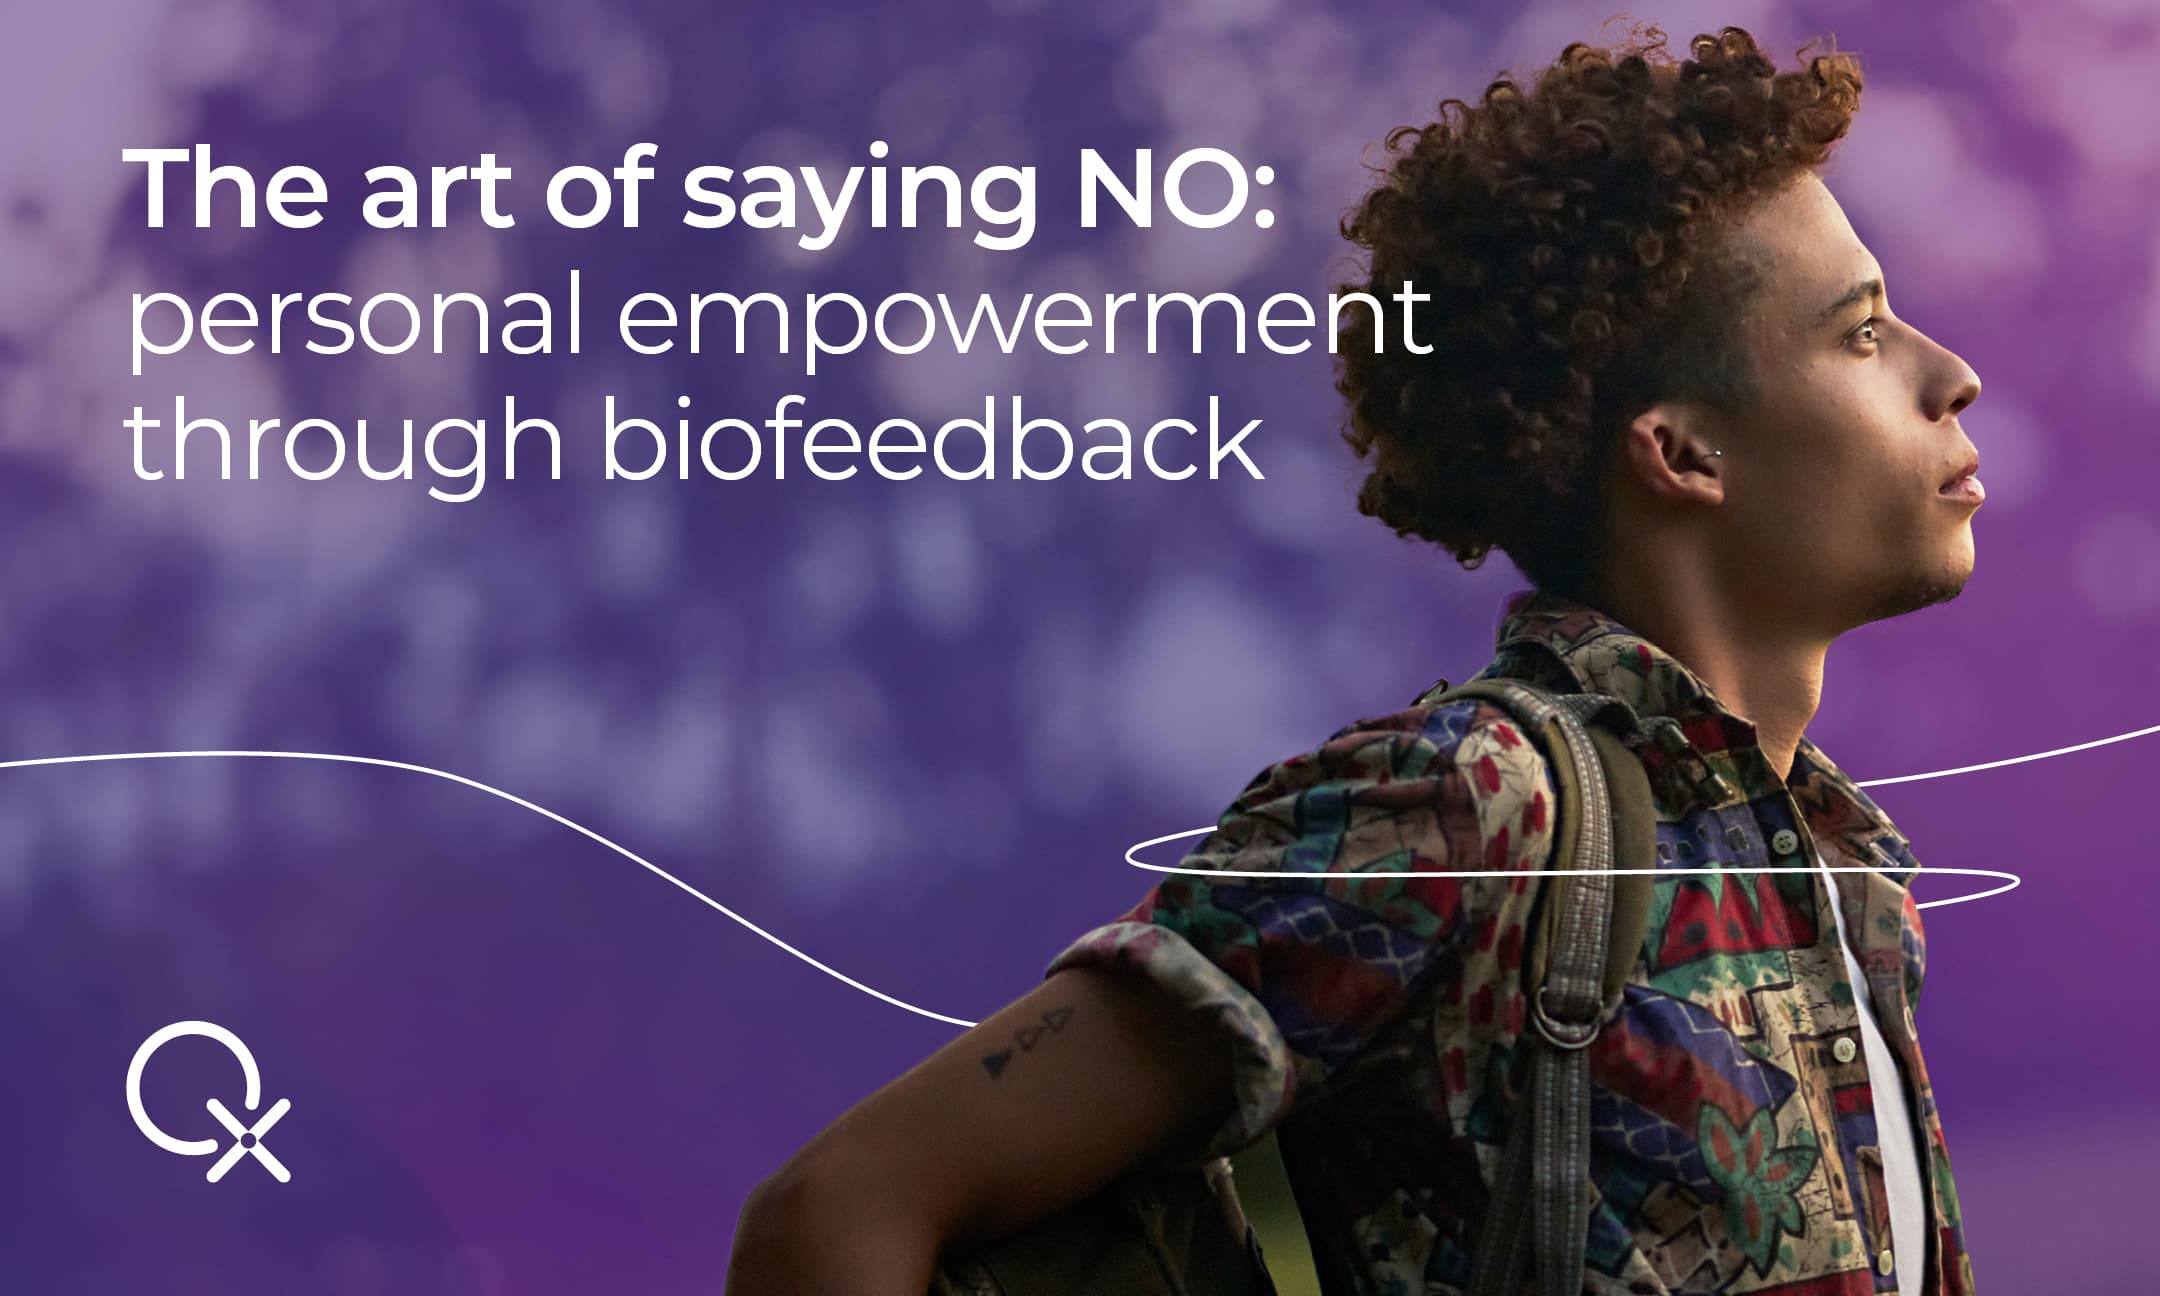 Biofeedback can boost personal empowerment, helping you to confidently say “no” when you need to.